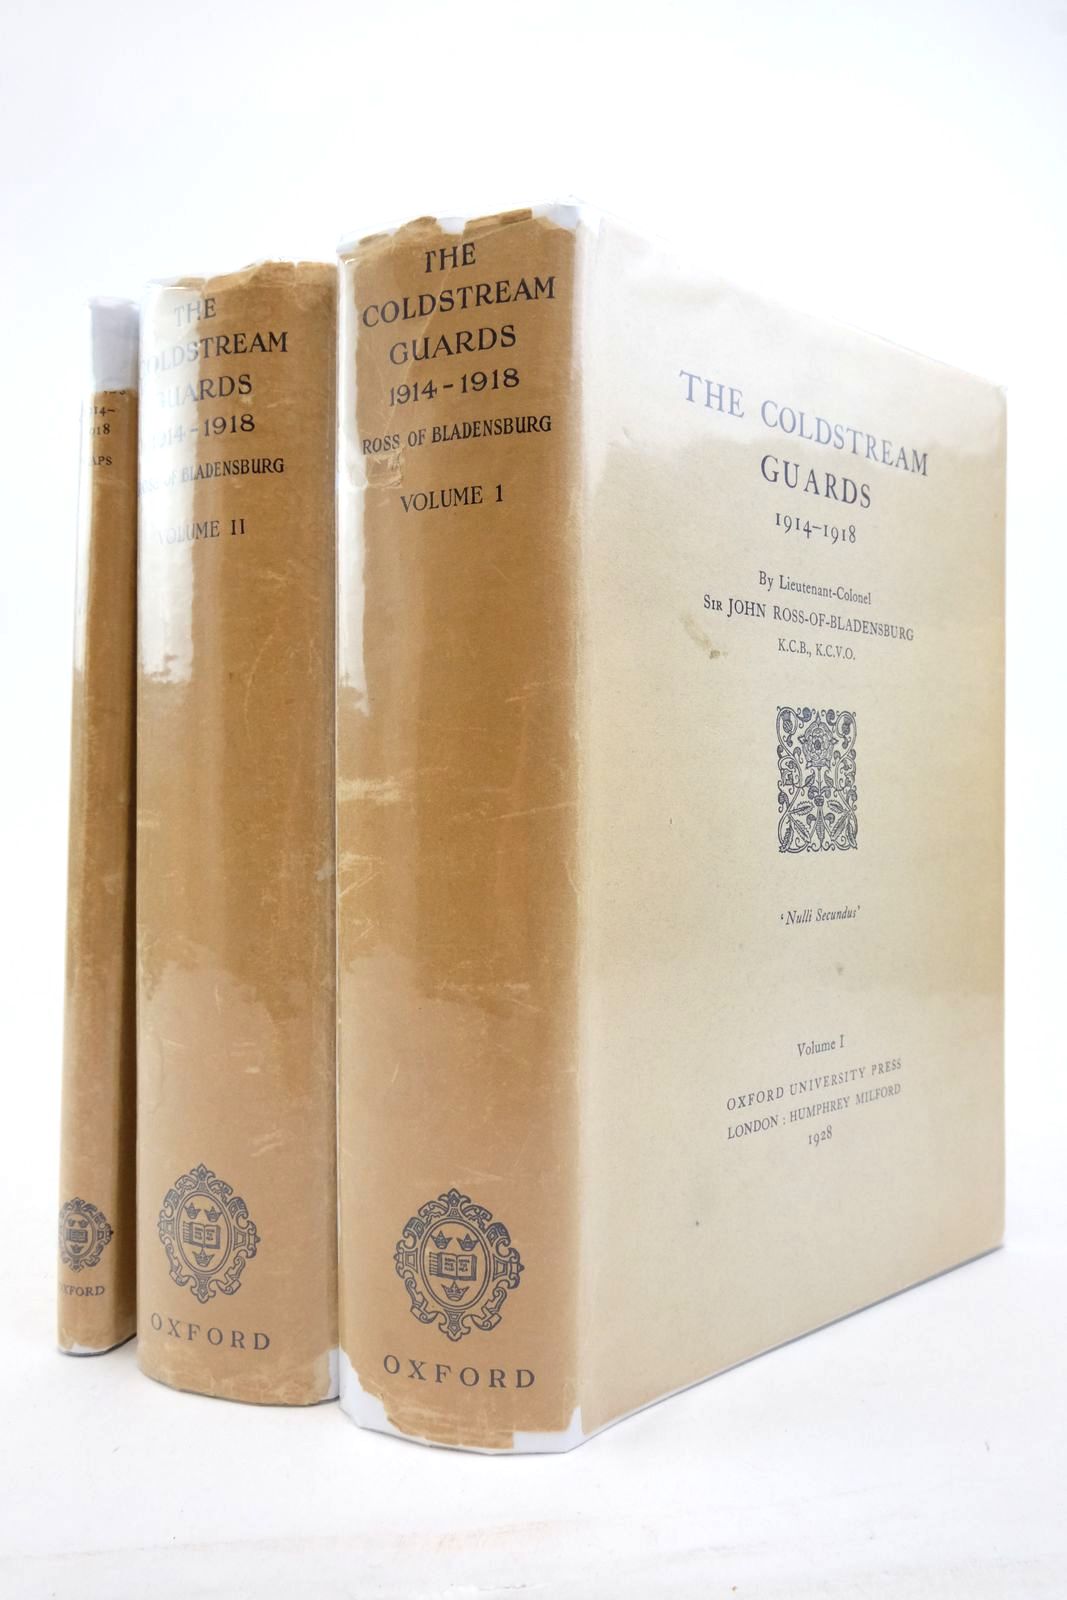 Photo of THE COLDSTREAM GUARDS 1914-1918 (3 VOLUMES) written by Ross-Of, published by Oxford University Press, Humphrey Milford (STOCK CODE: 2137731)  for sale by Stella & Rose's Books